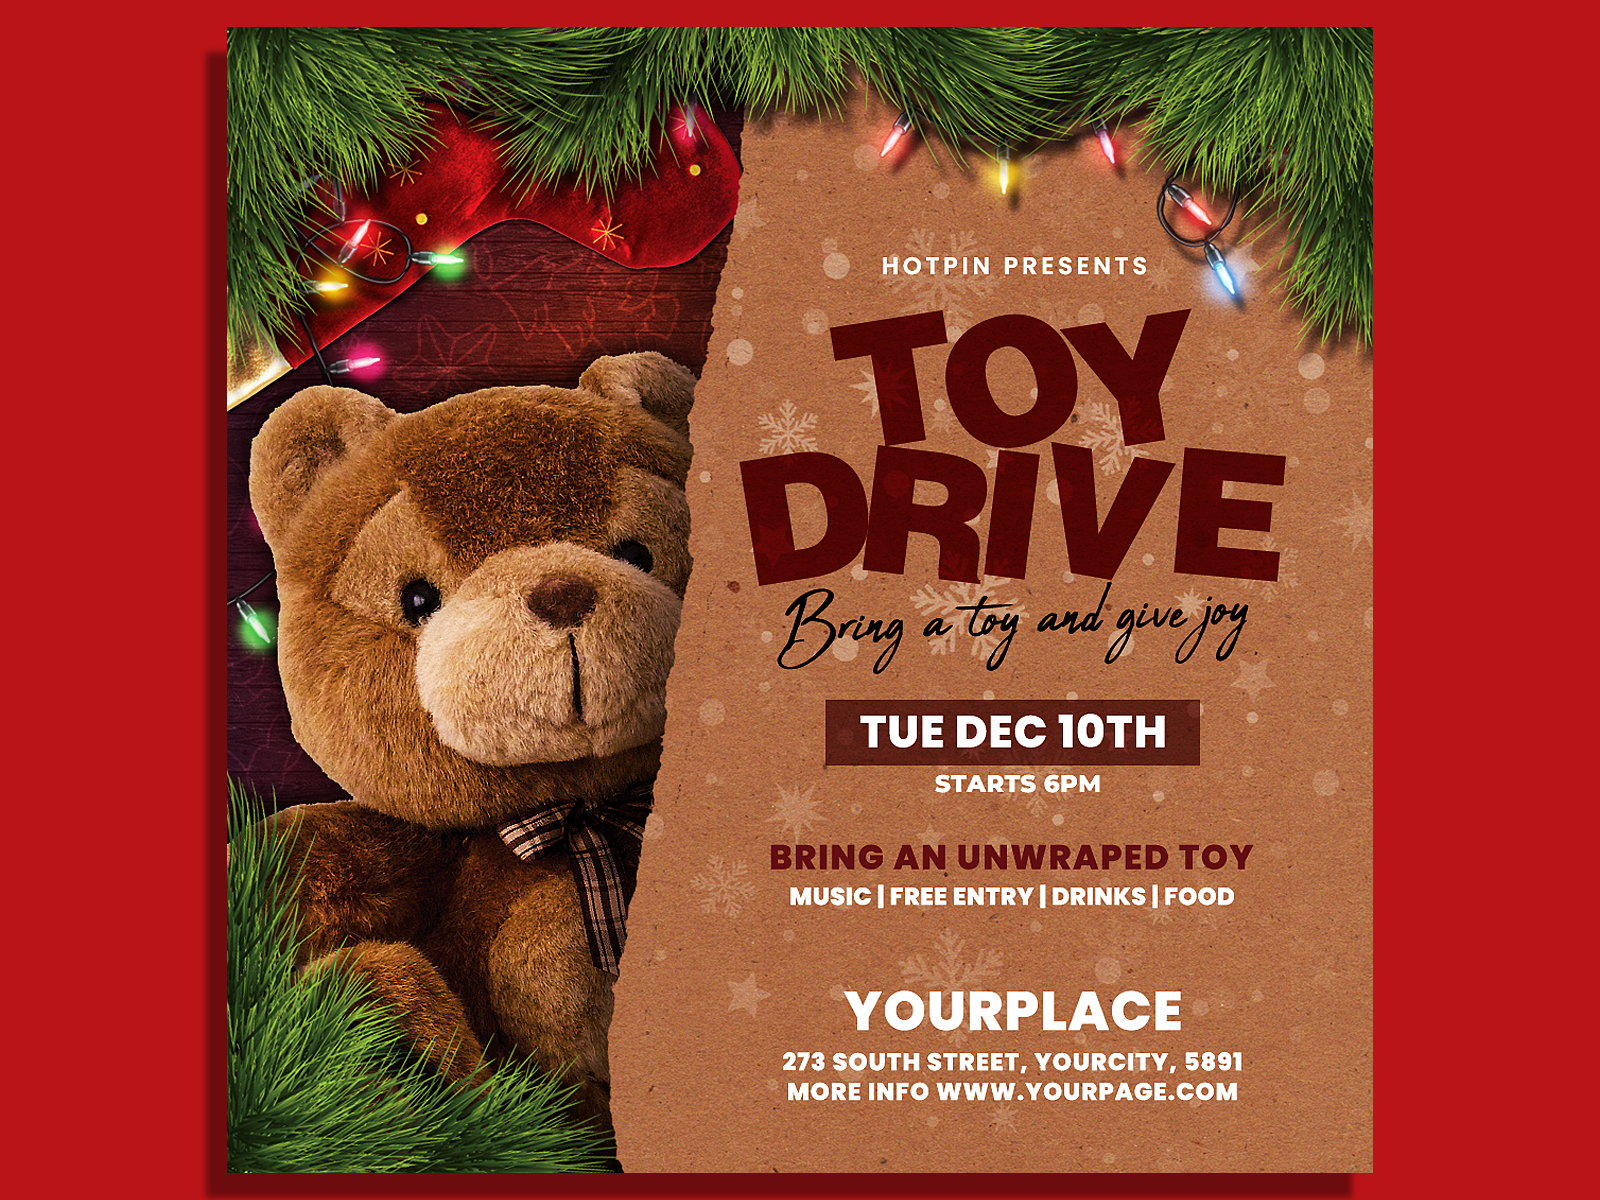 christmas-toy-drive-flyer-template-by-hotpin-on-dribbble